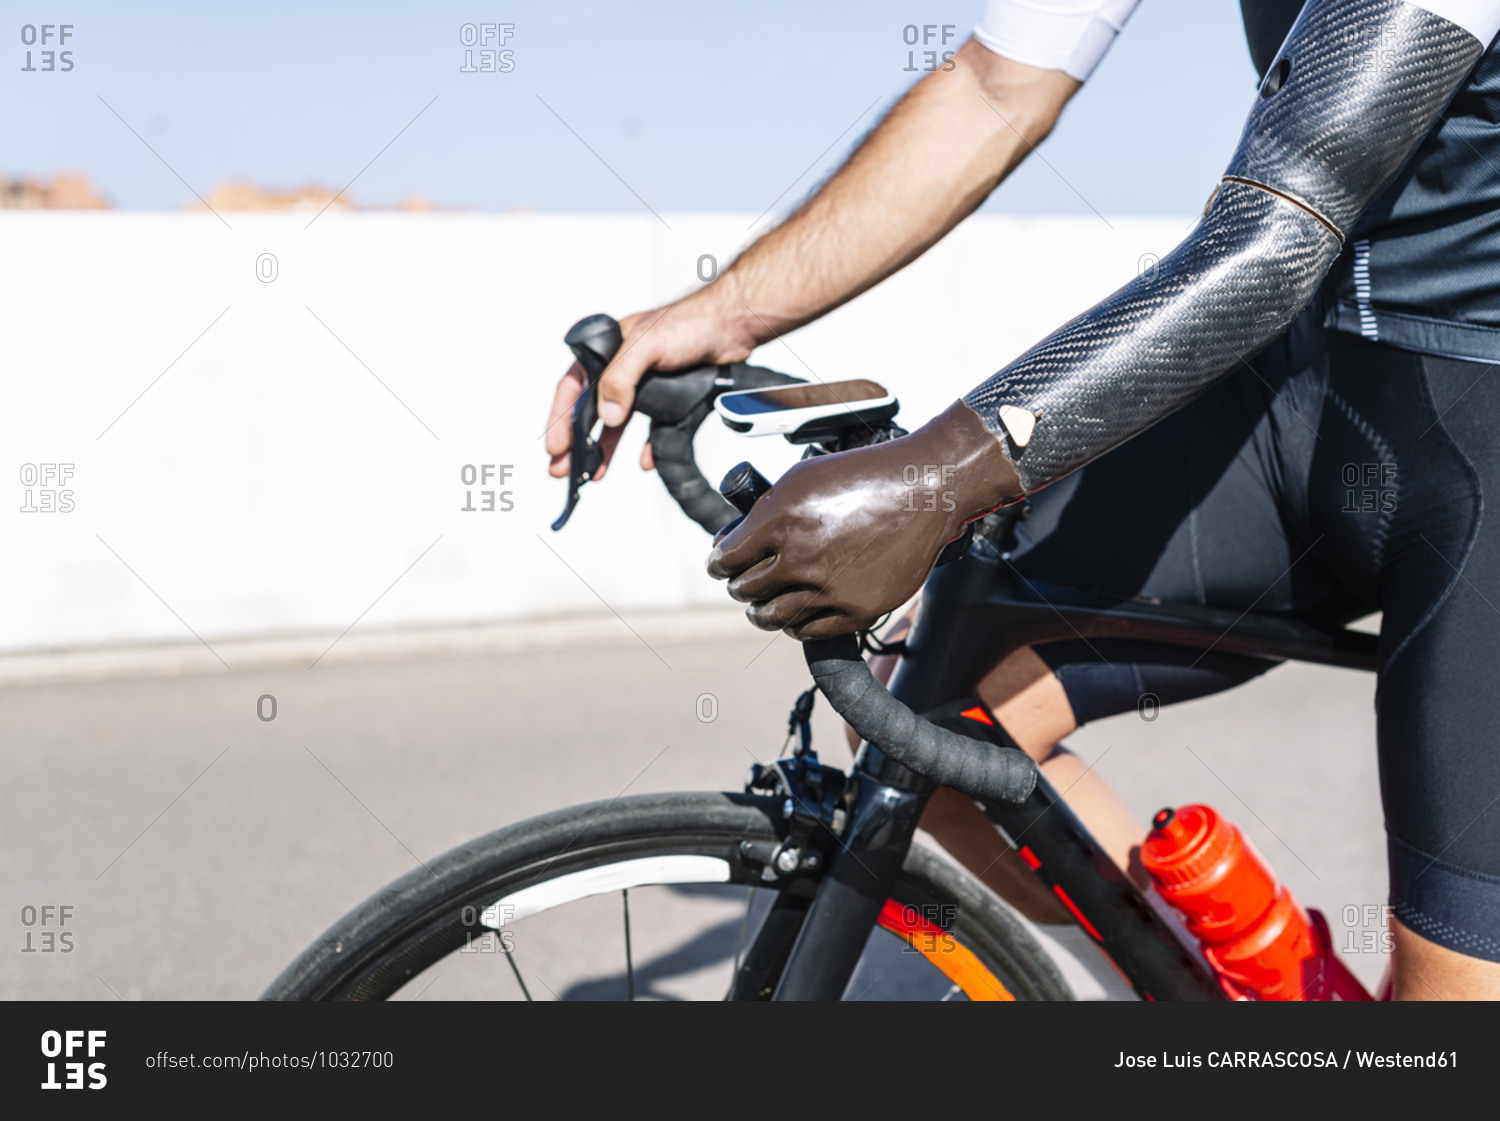 Close-up of male amputee athlete with artificial hand riding bicycle on road